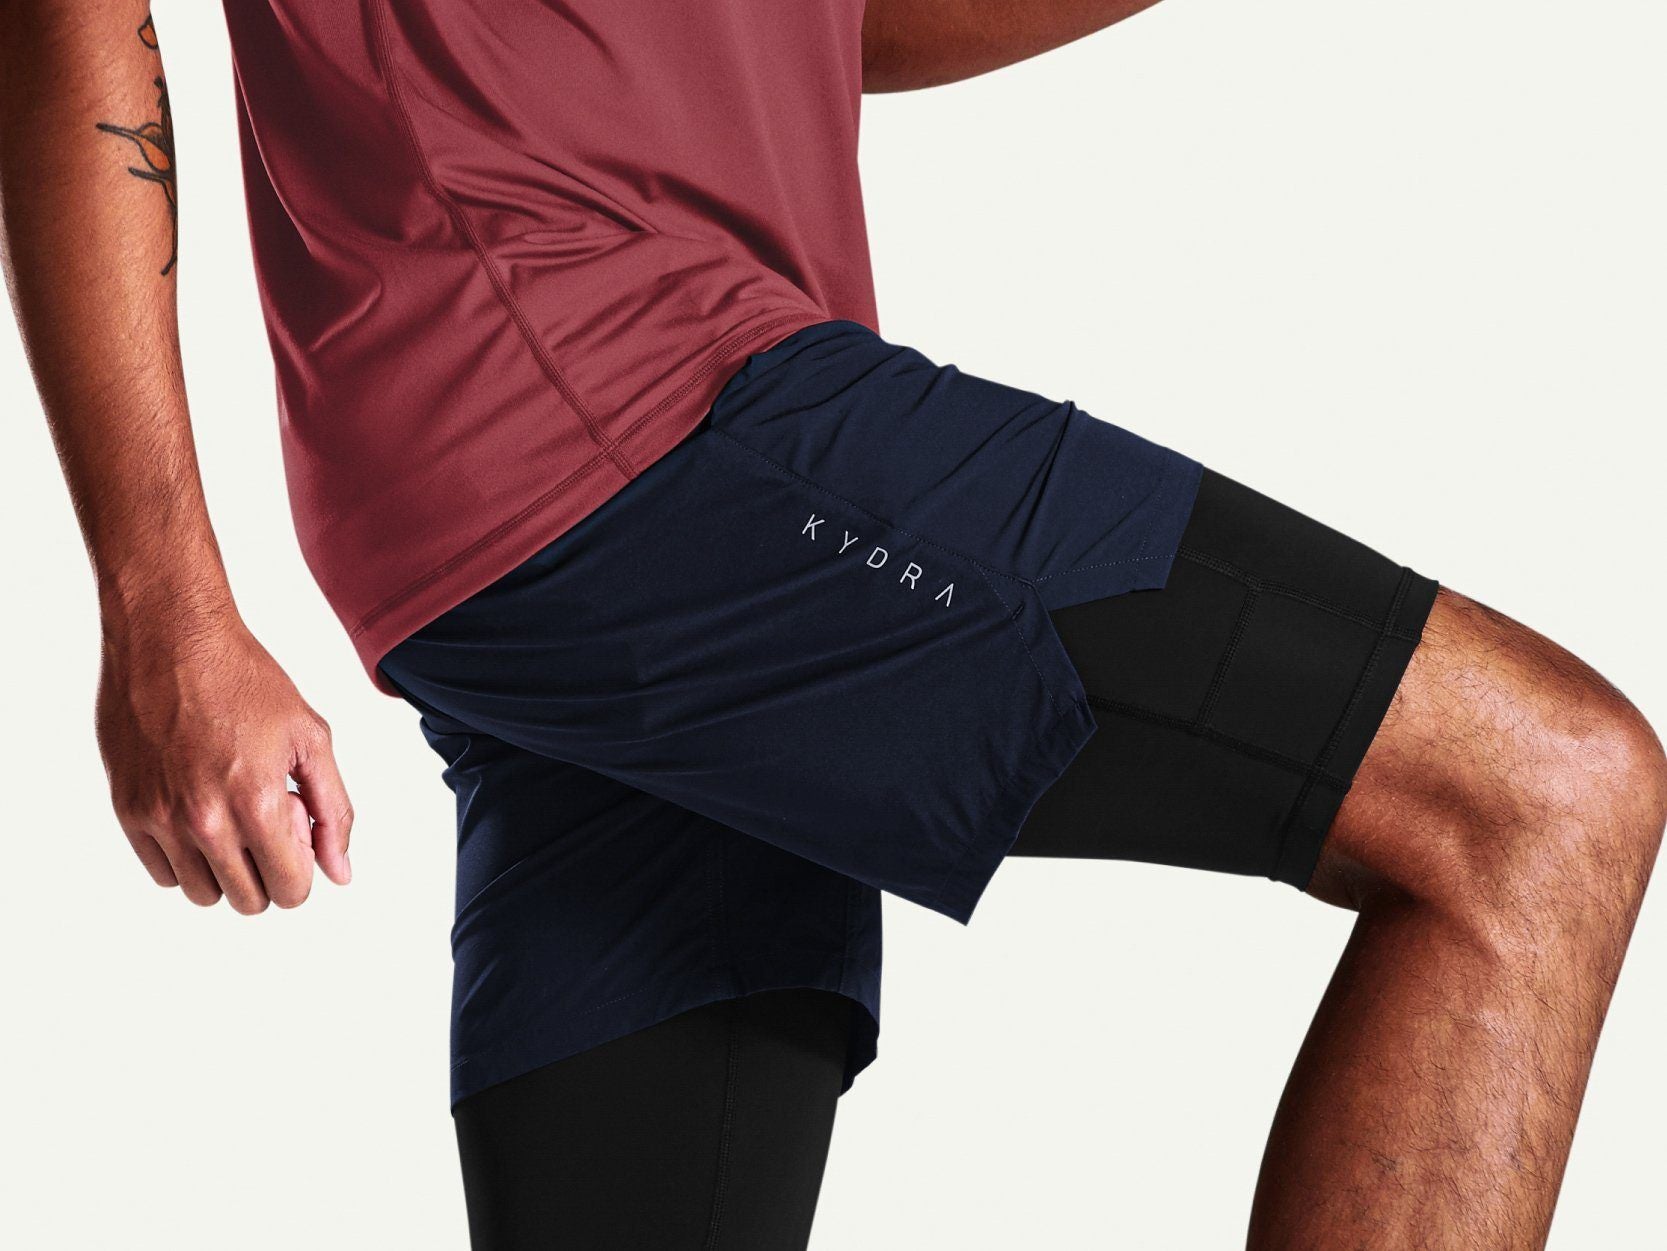 Lined or Linerless Shorts: Does It Actually Make a Difference?